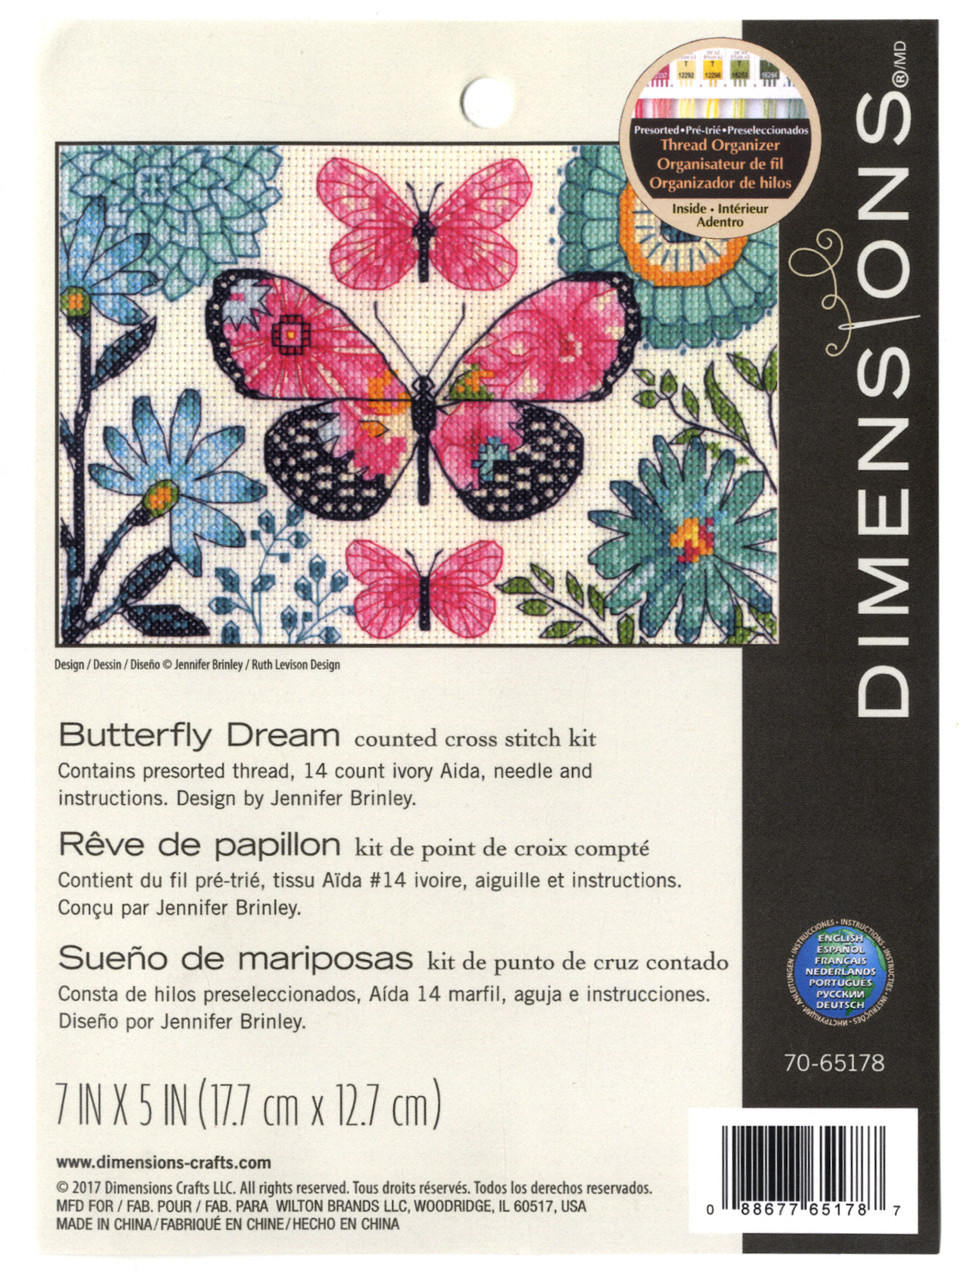 Dimensions - Butterfly Dream